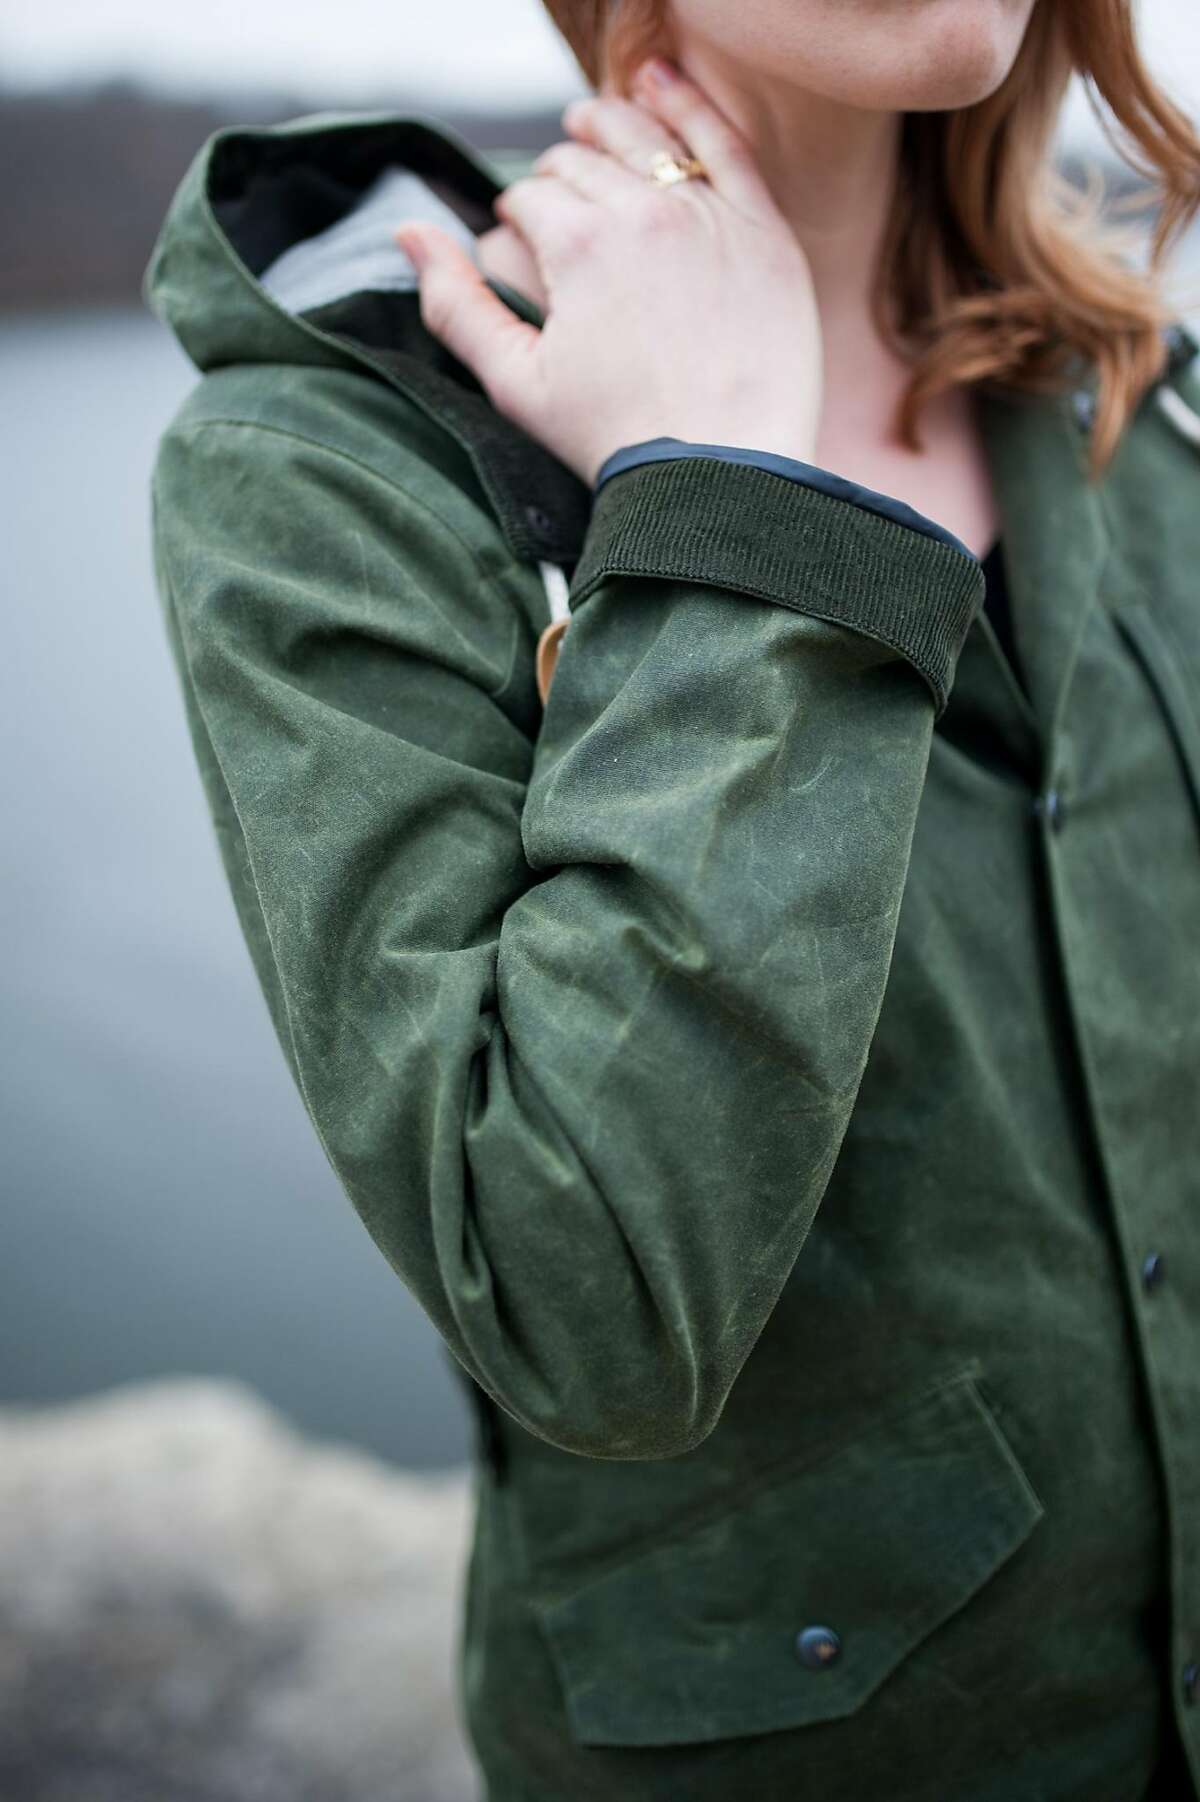 Daniel Smith, 29, launched his first heritage outerwear jacket on his company�s website. His brand, Ketums, is the family name, Smutek, spelled backward. The Bondy jacket ($368), available for men and women, is the brand�s first product, and is made from waxed cotton, sourced from a small family mill in Scotland.